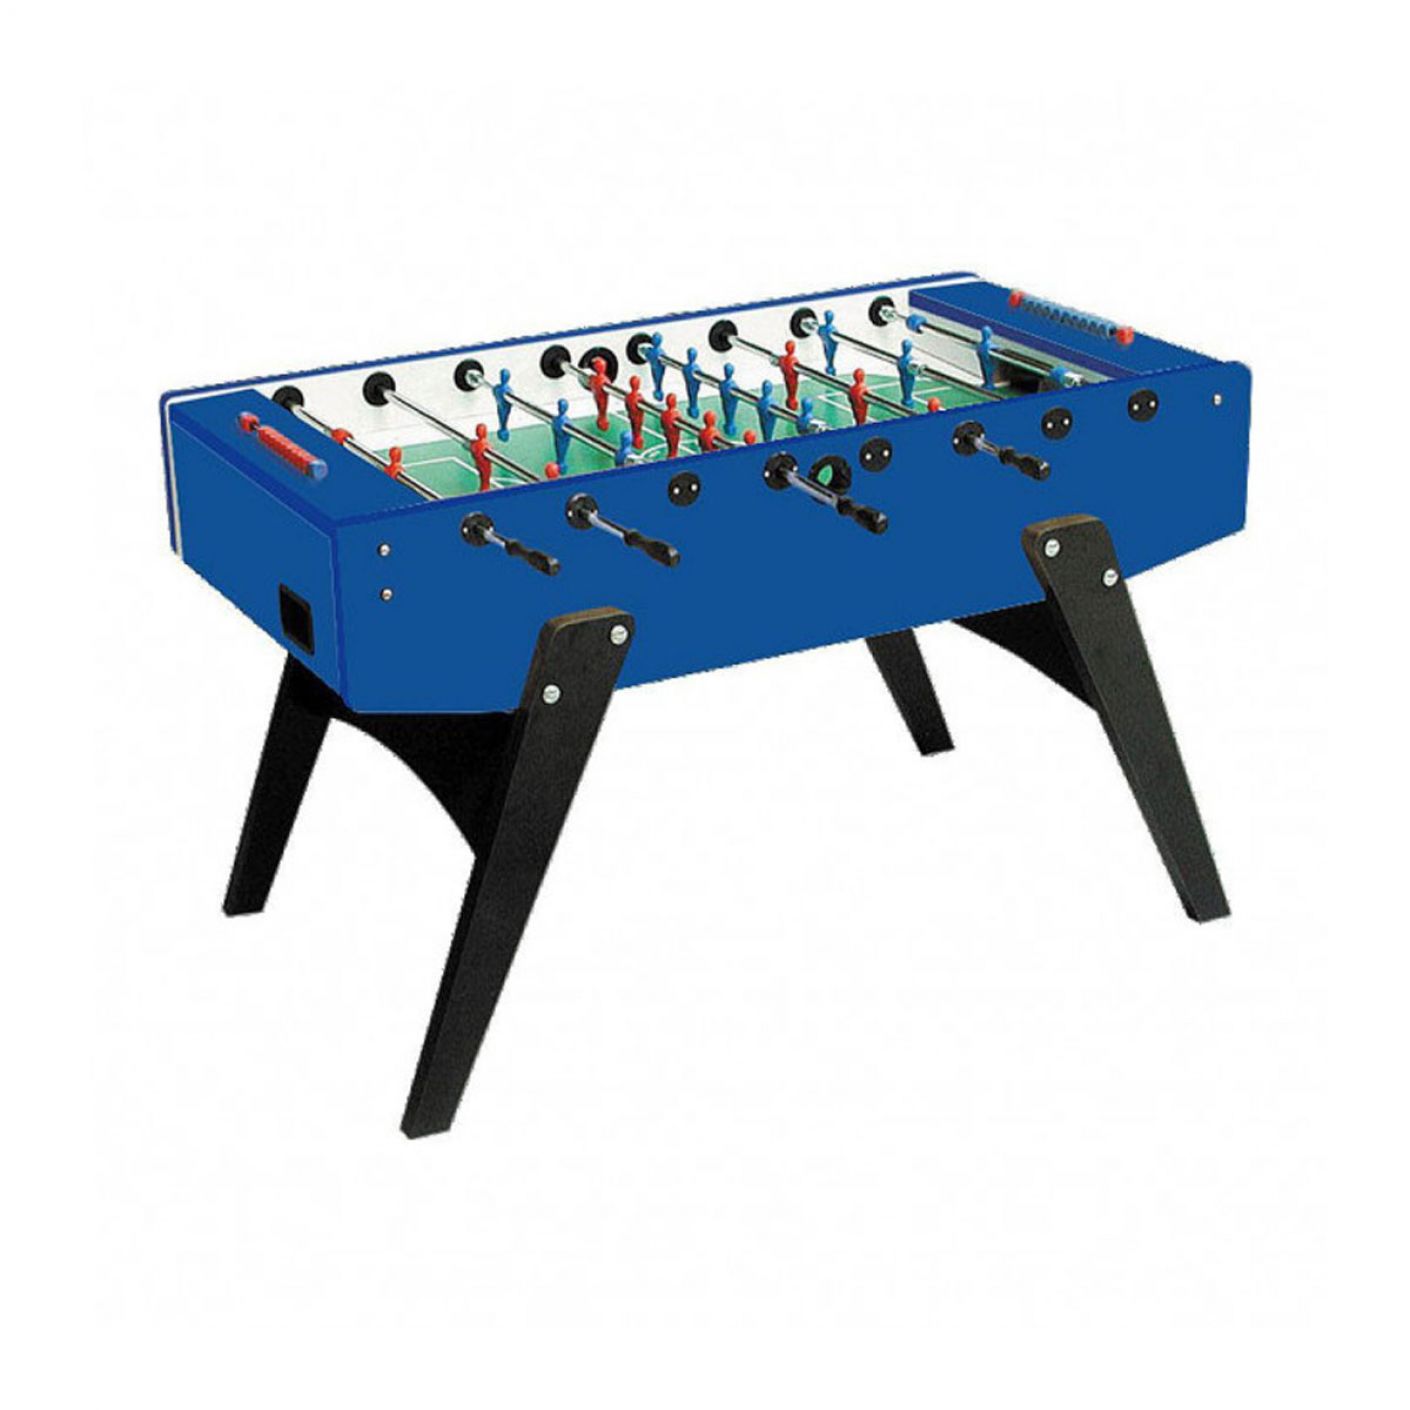 Garlando Table Football G-2000 blue with retracting temples